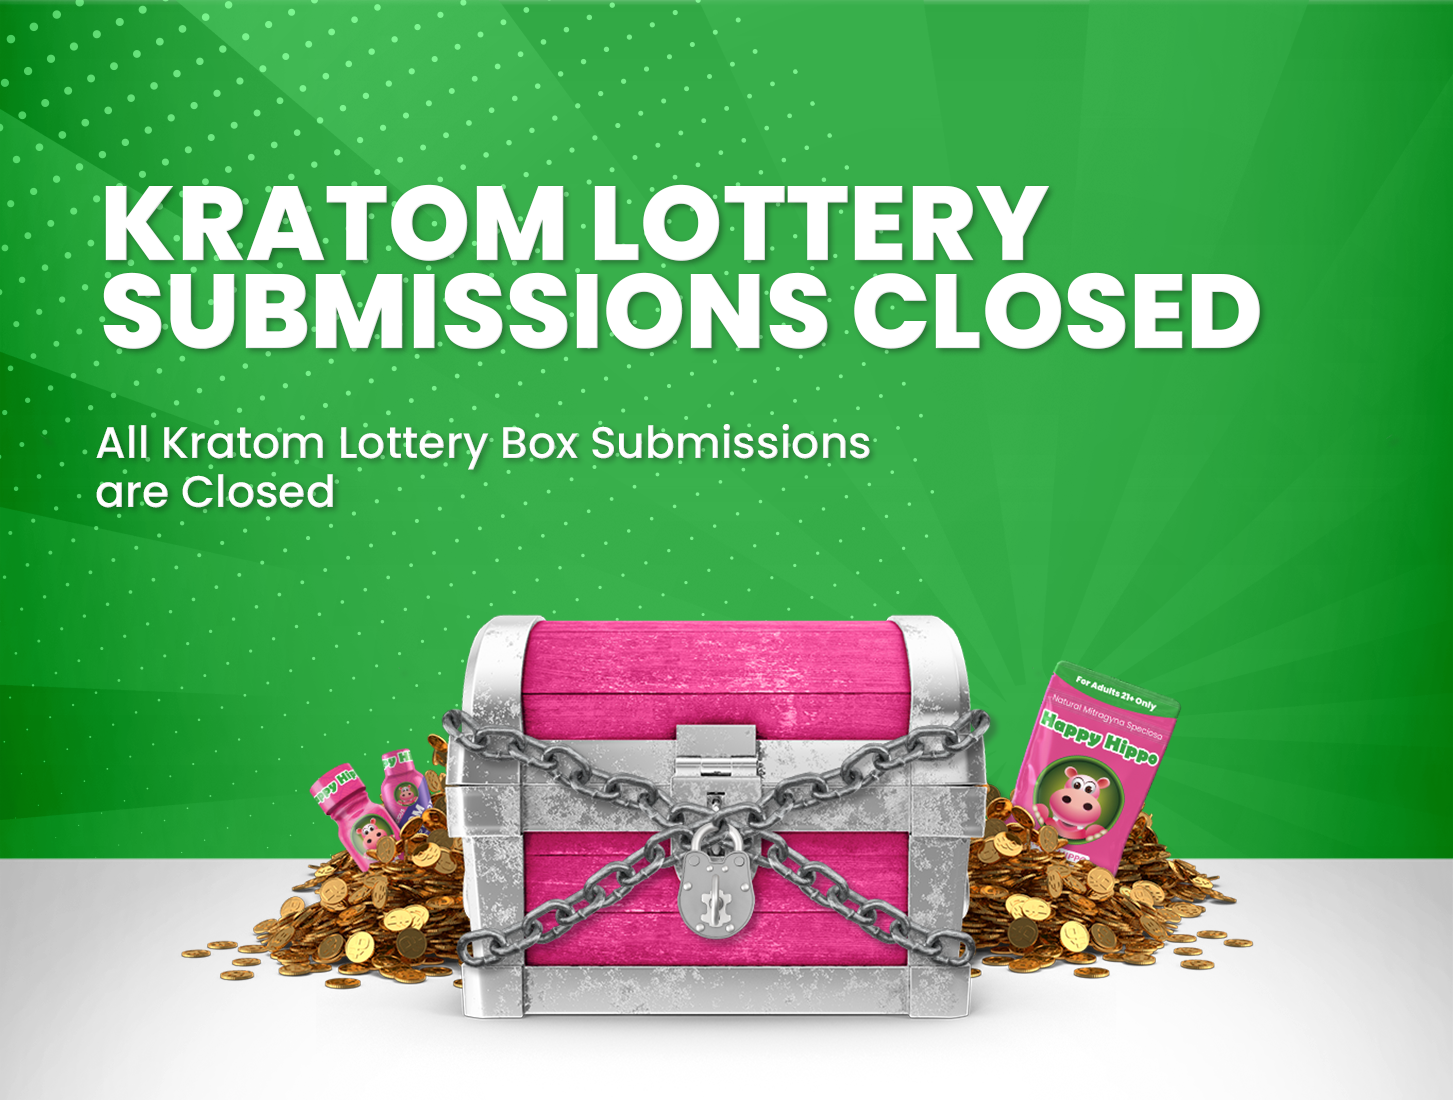 Kratom Lottery Submissions Closed